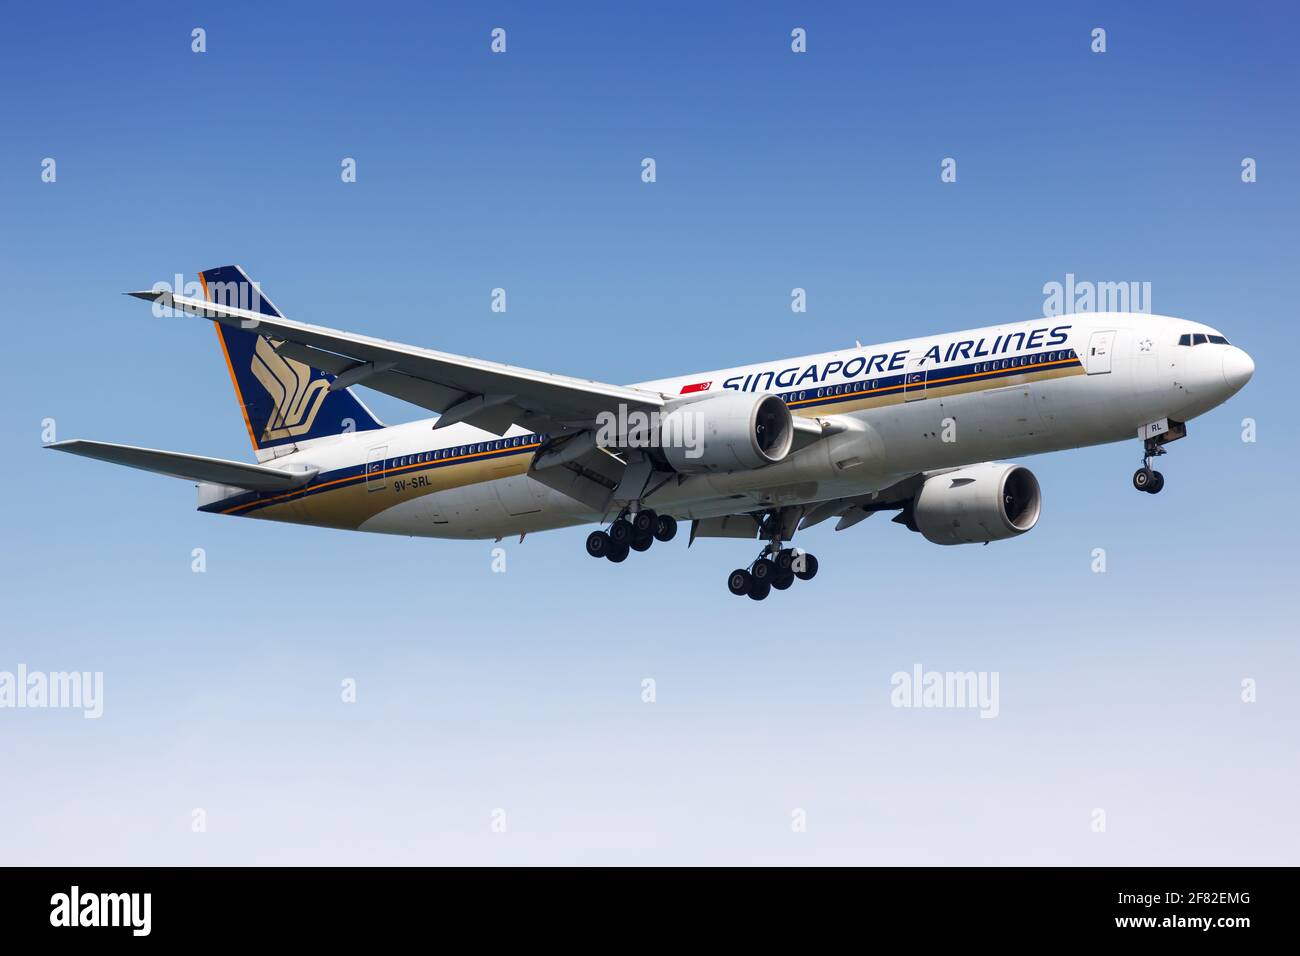 Changi, Singapore – January 29, 2018: Singapore Airlines Boeing 777-300ER airplane at Changi airport (SIN) in Singapore. Boeing is an American aircraf Stock Photo